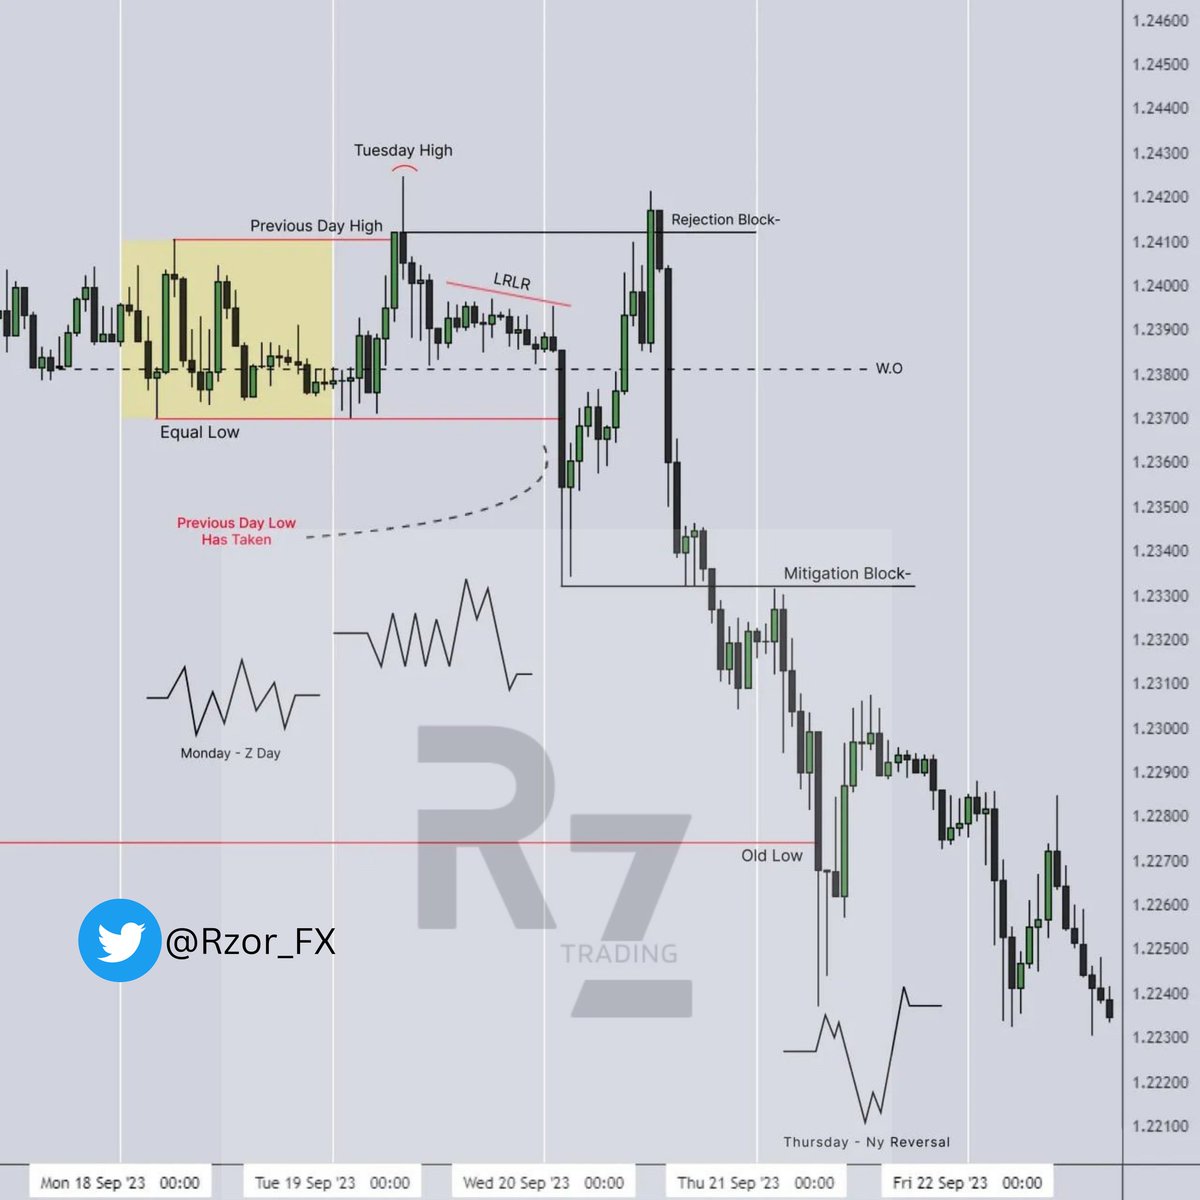 ▪️GBPUSD weekly review ~ 1H
 -
 -
#forex #forextrading #forexmentor #priceaction #marketstructure #tradingpsychology #fundametalanalysis #tradingstrategy #riskmanagement #trading  #banknifty #tradingeducation  #tradingtips #forexmarket #forexlifestyle